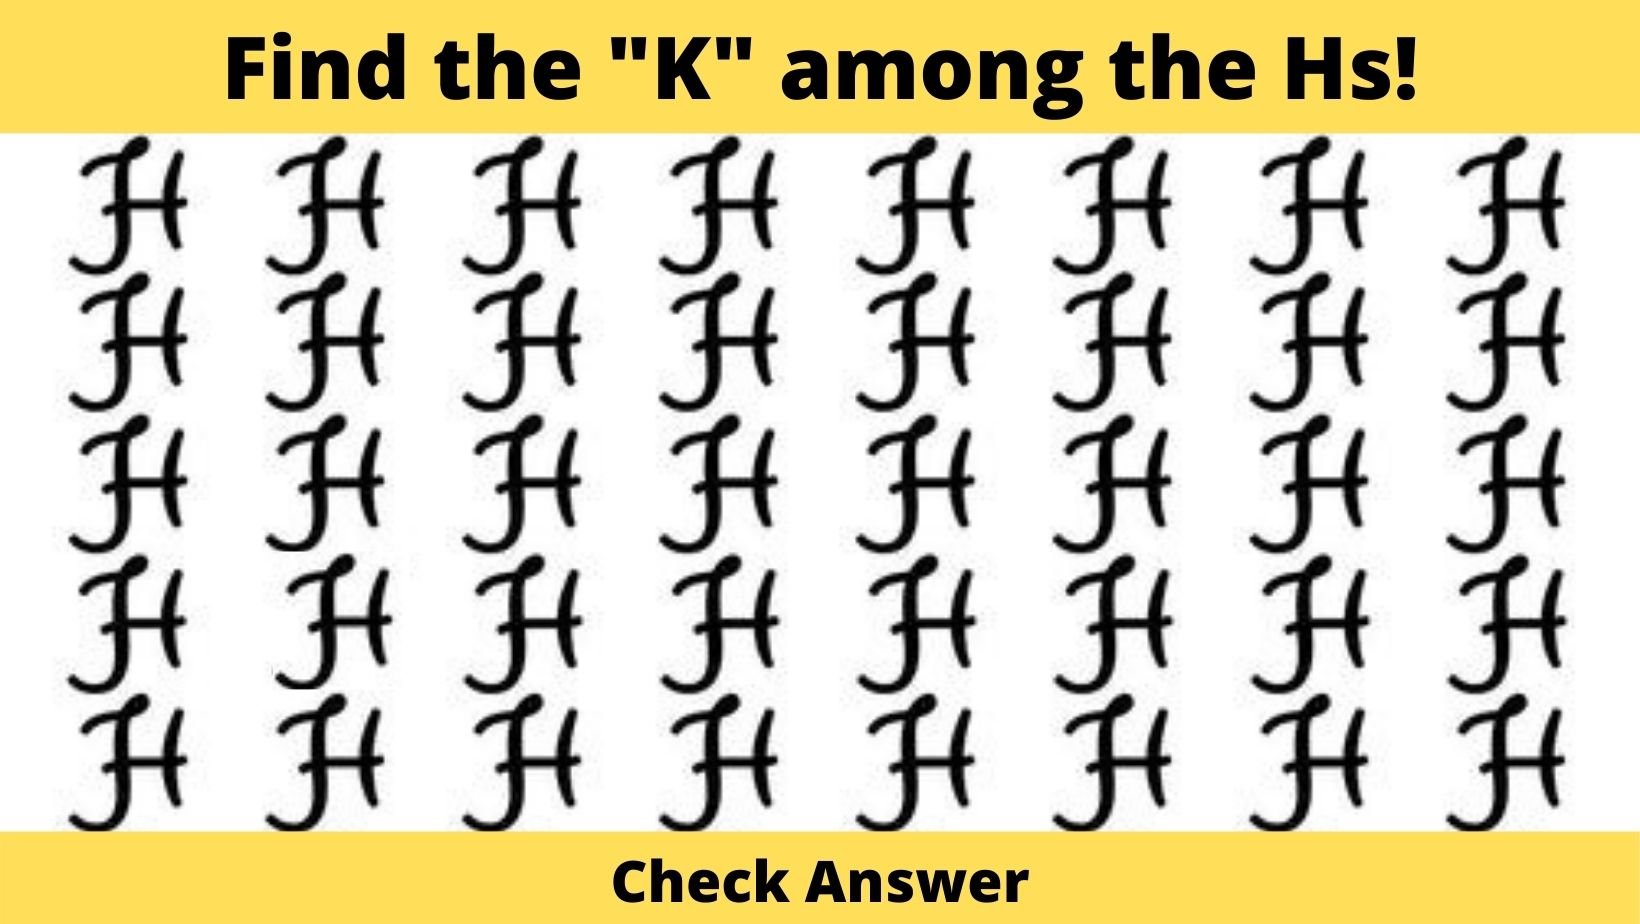 small joys thumbnail 3 3.jpg?resize=1200,630 - Only People With A Sharp Vision Can Find The “K” Among The Hs In 60 Seconds